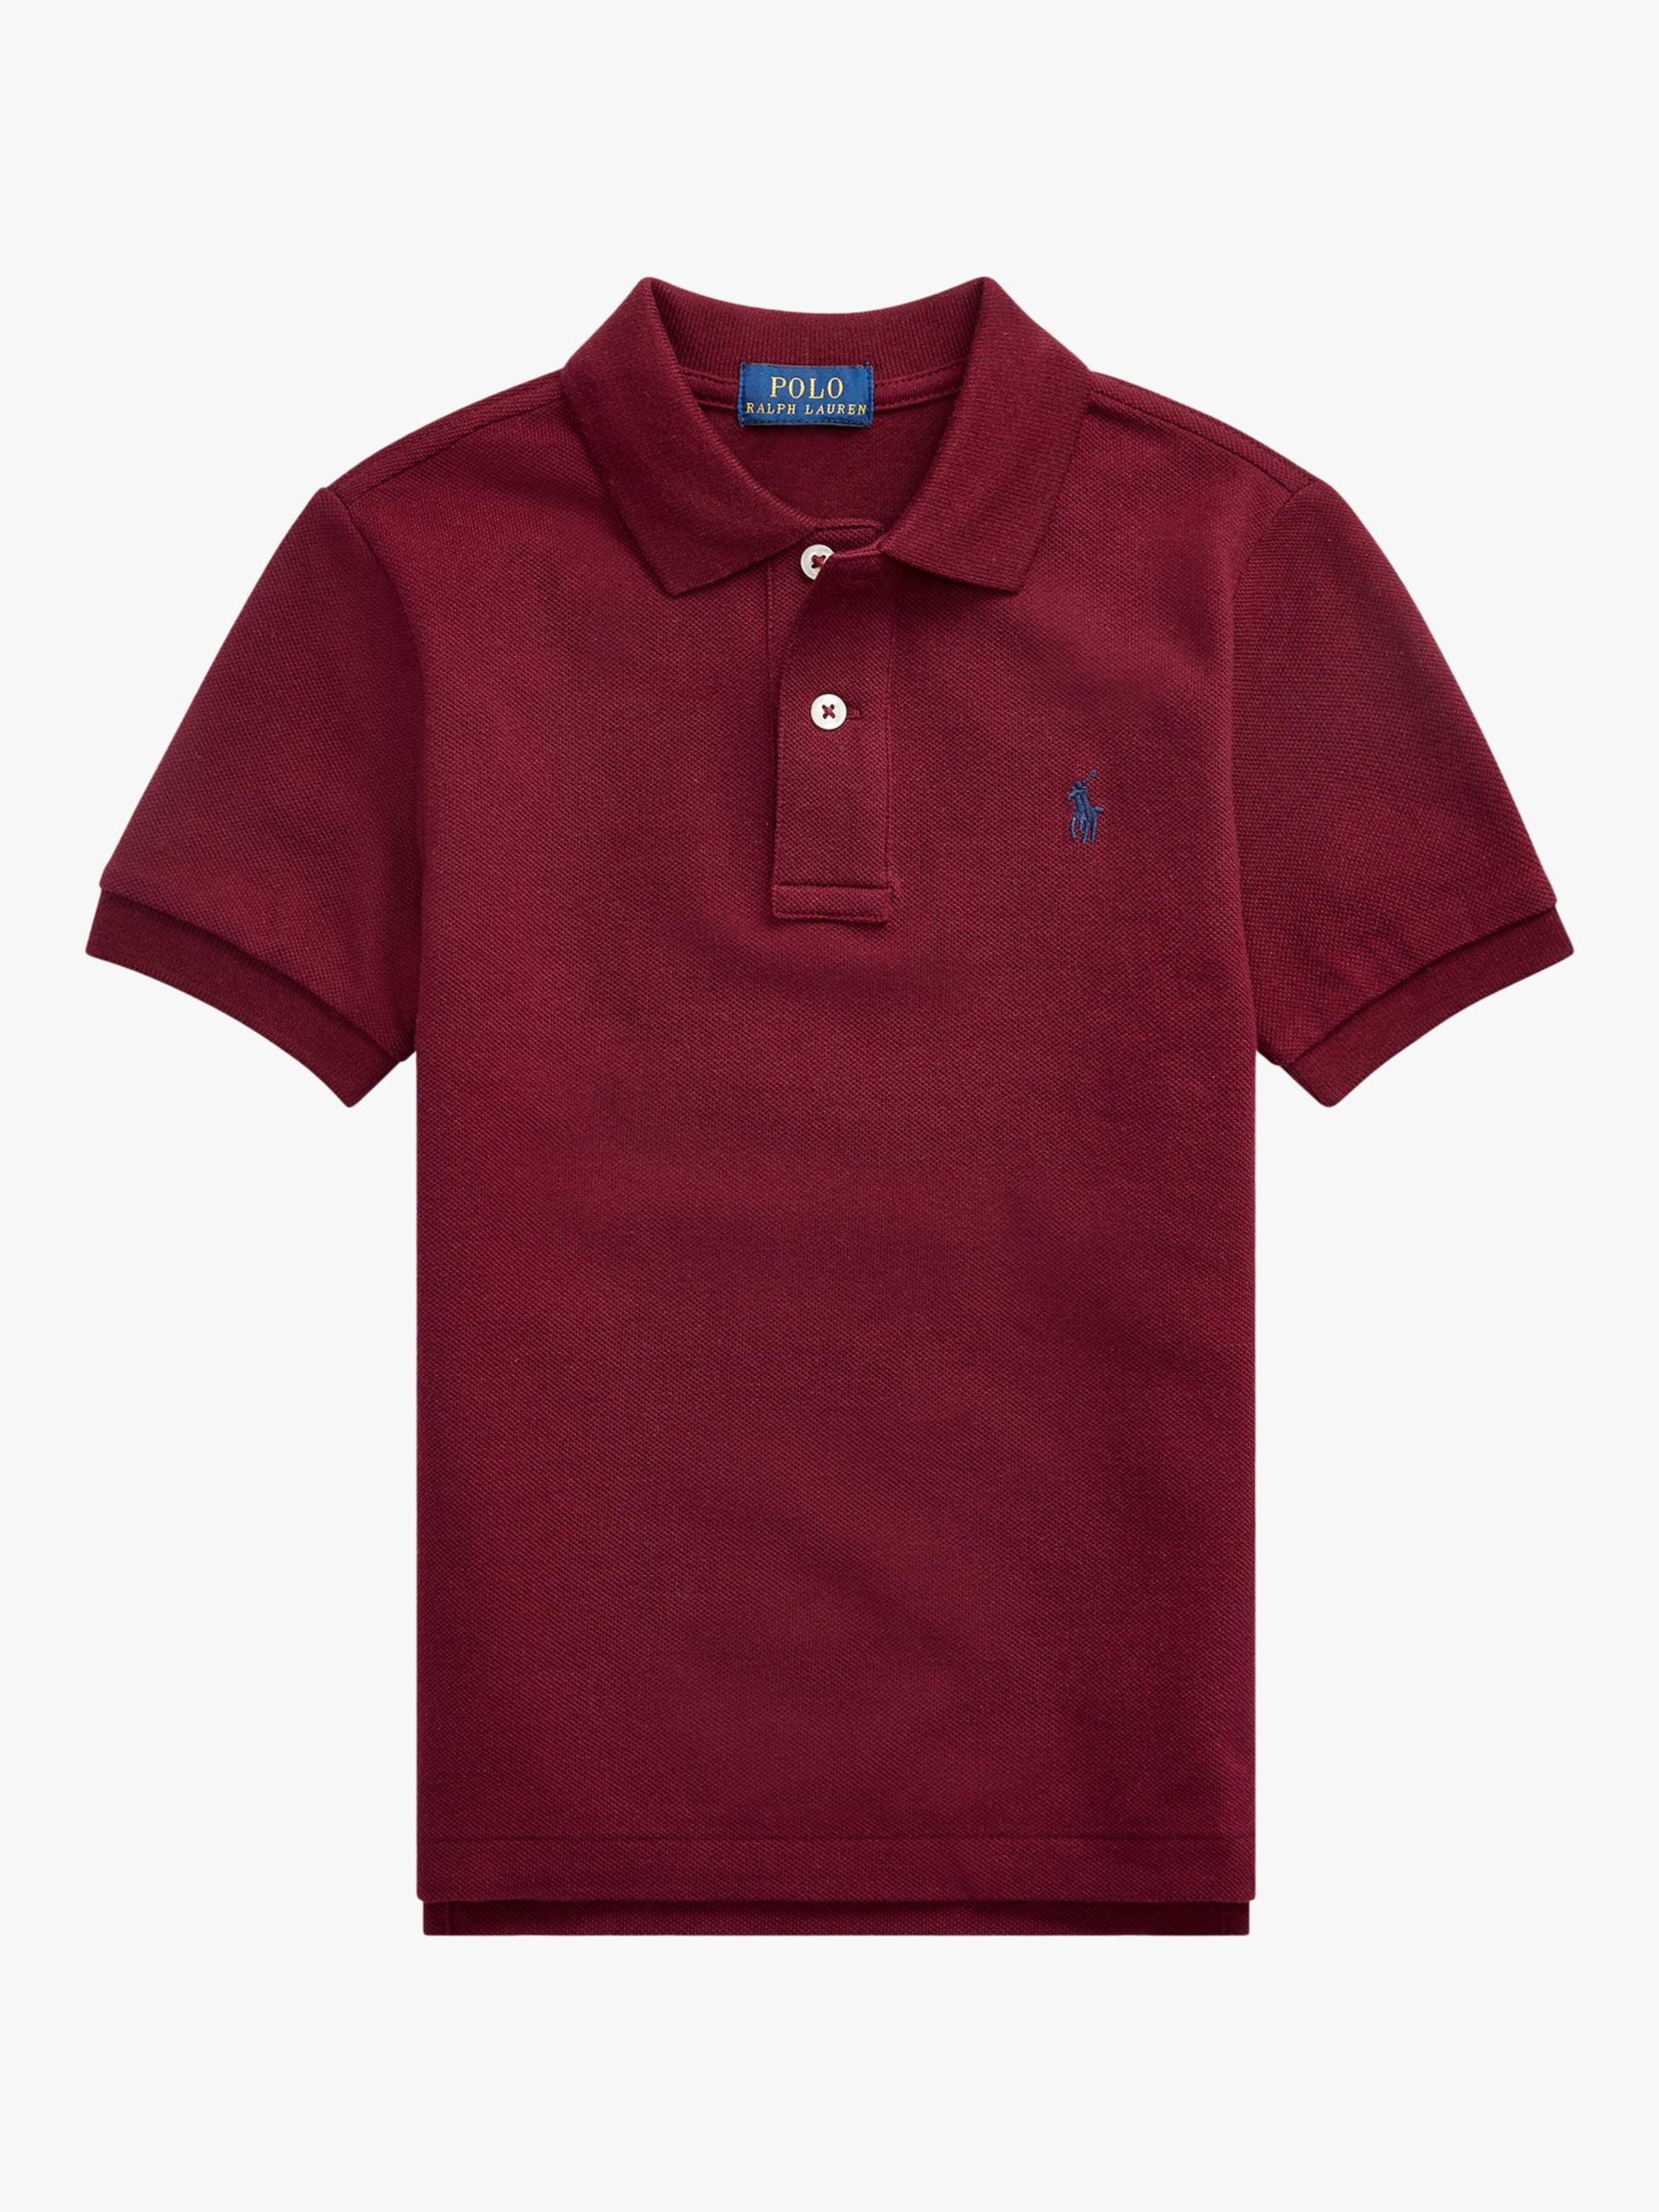 Image of Polo Ralph Lauren Boys Polo Knit Top Red